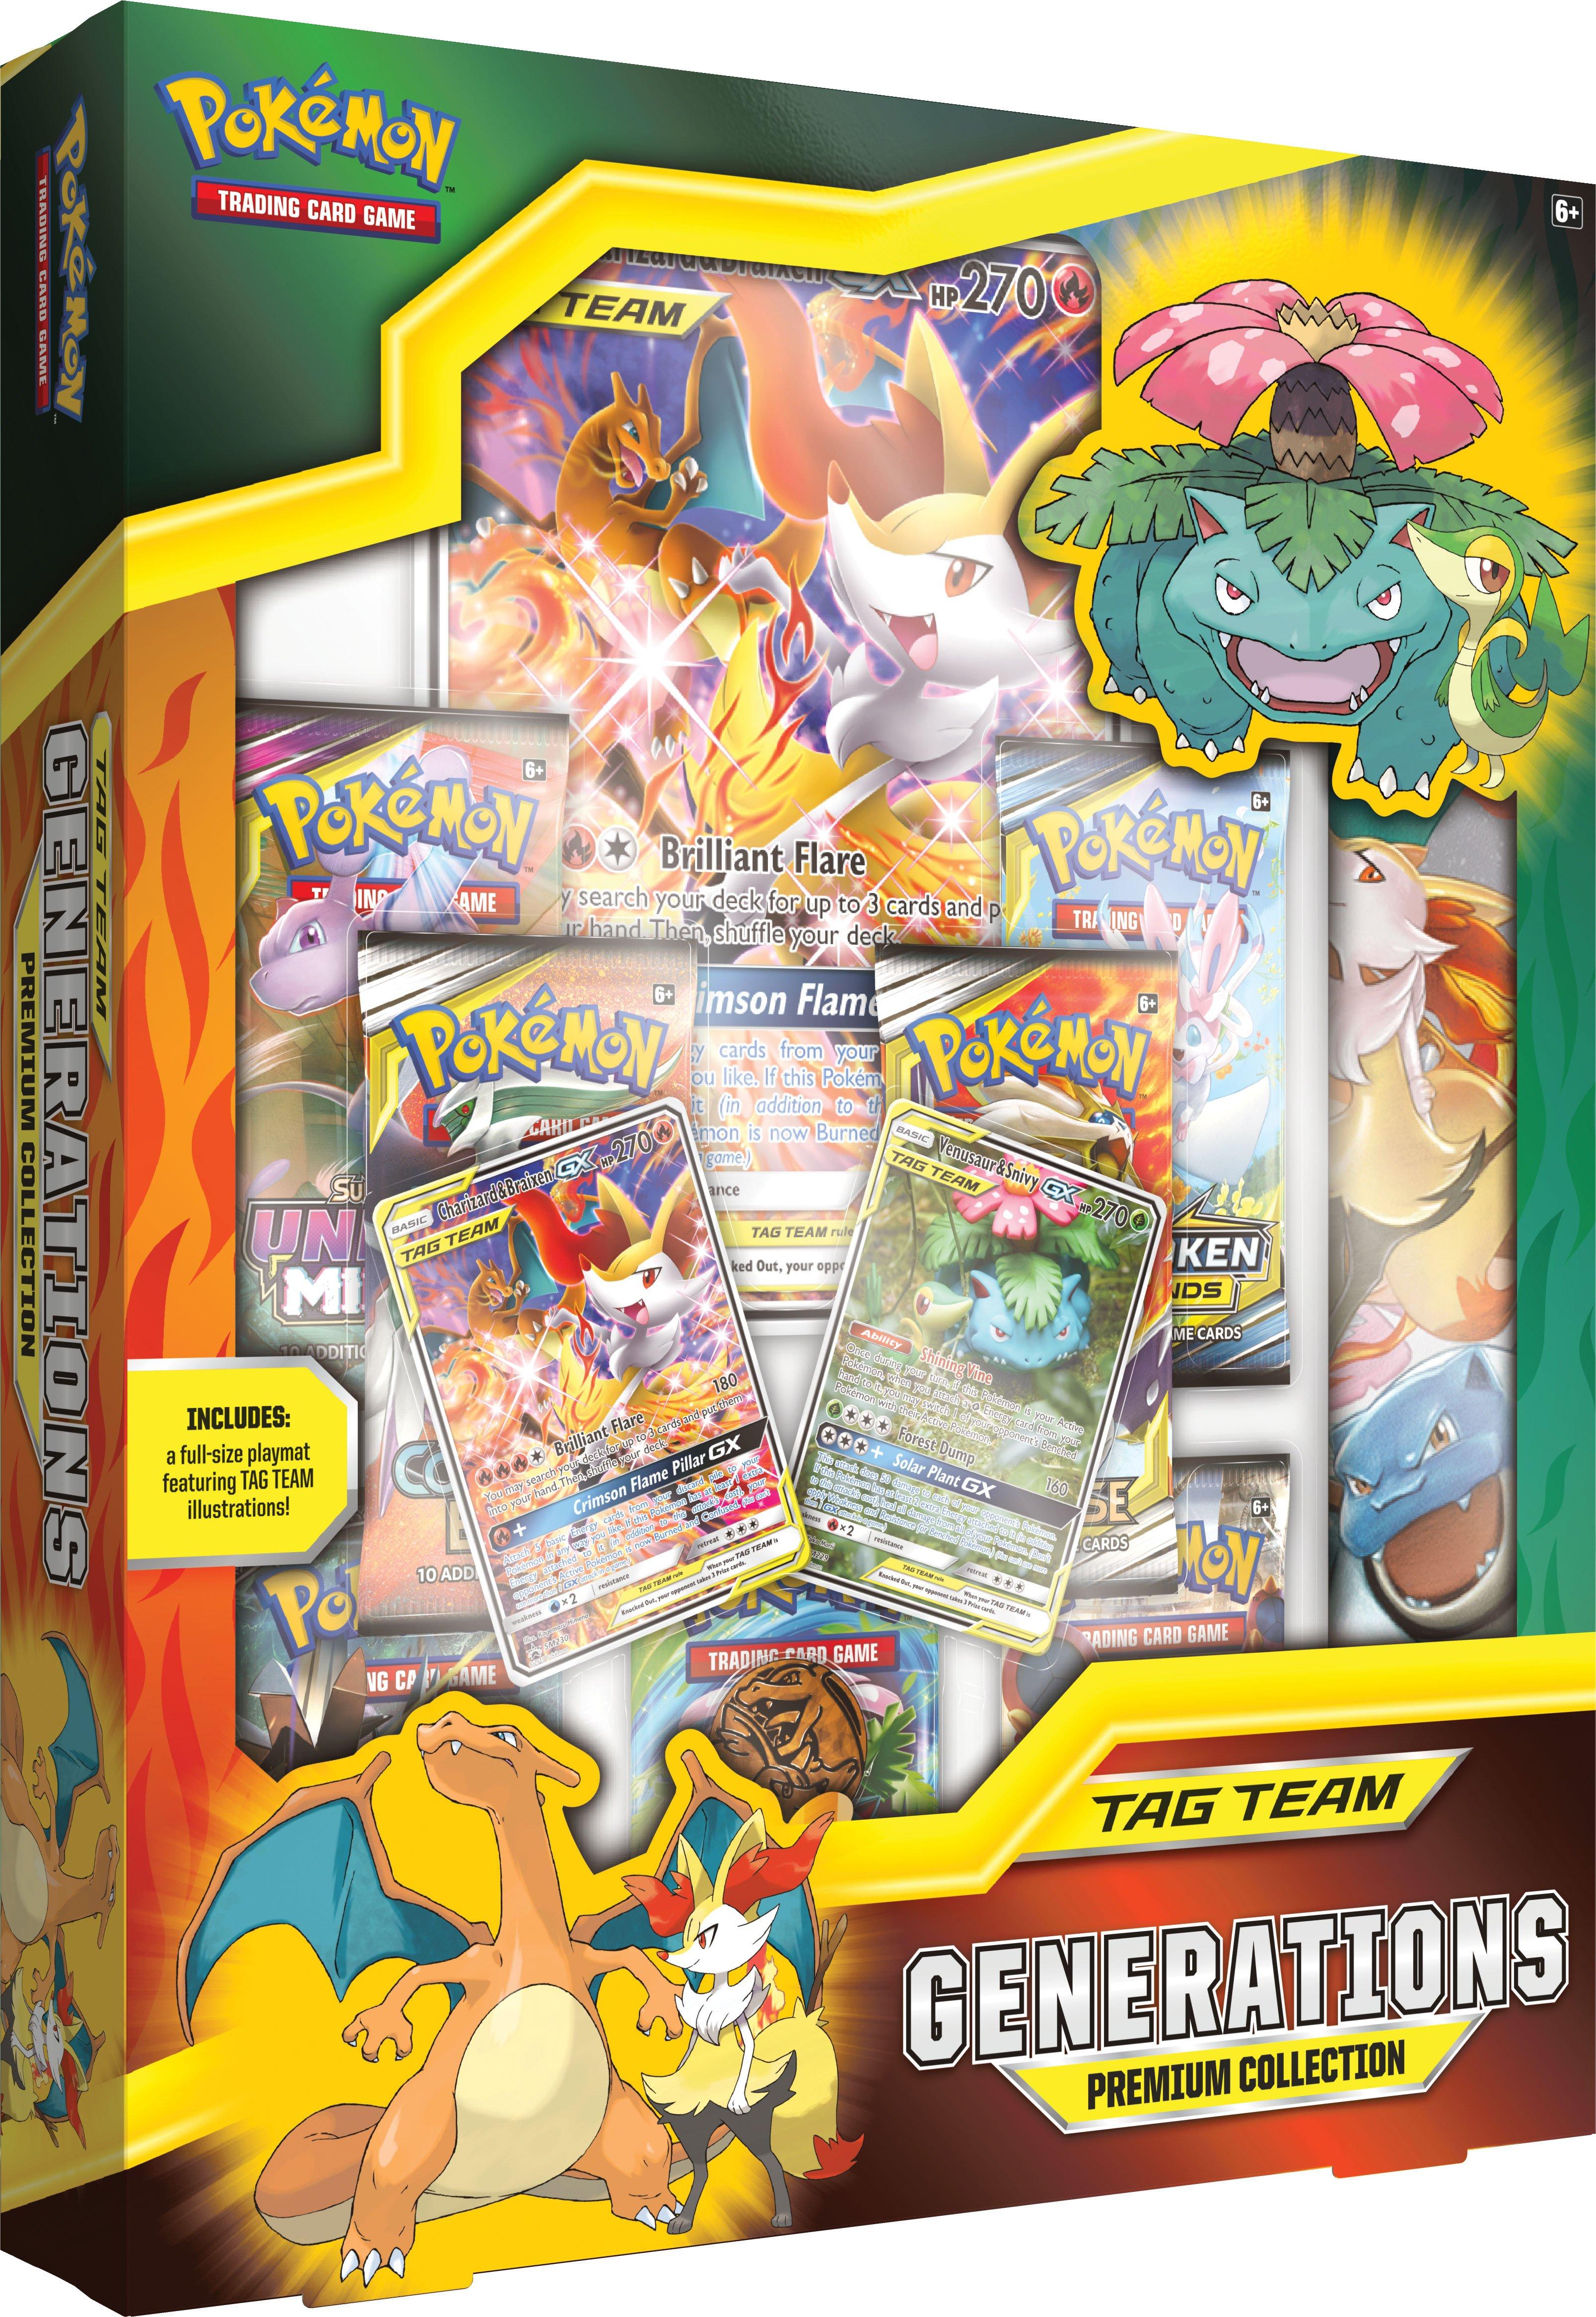 Pokemon Trading Card Game: TAG TEAM Generations Premium Collection | GameStop